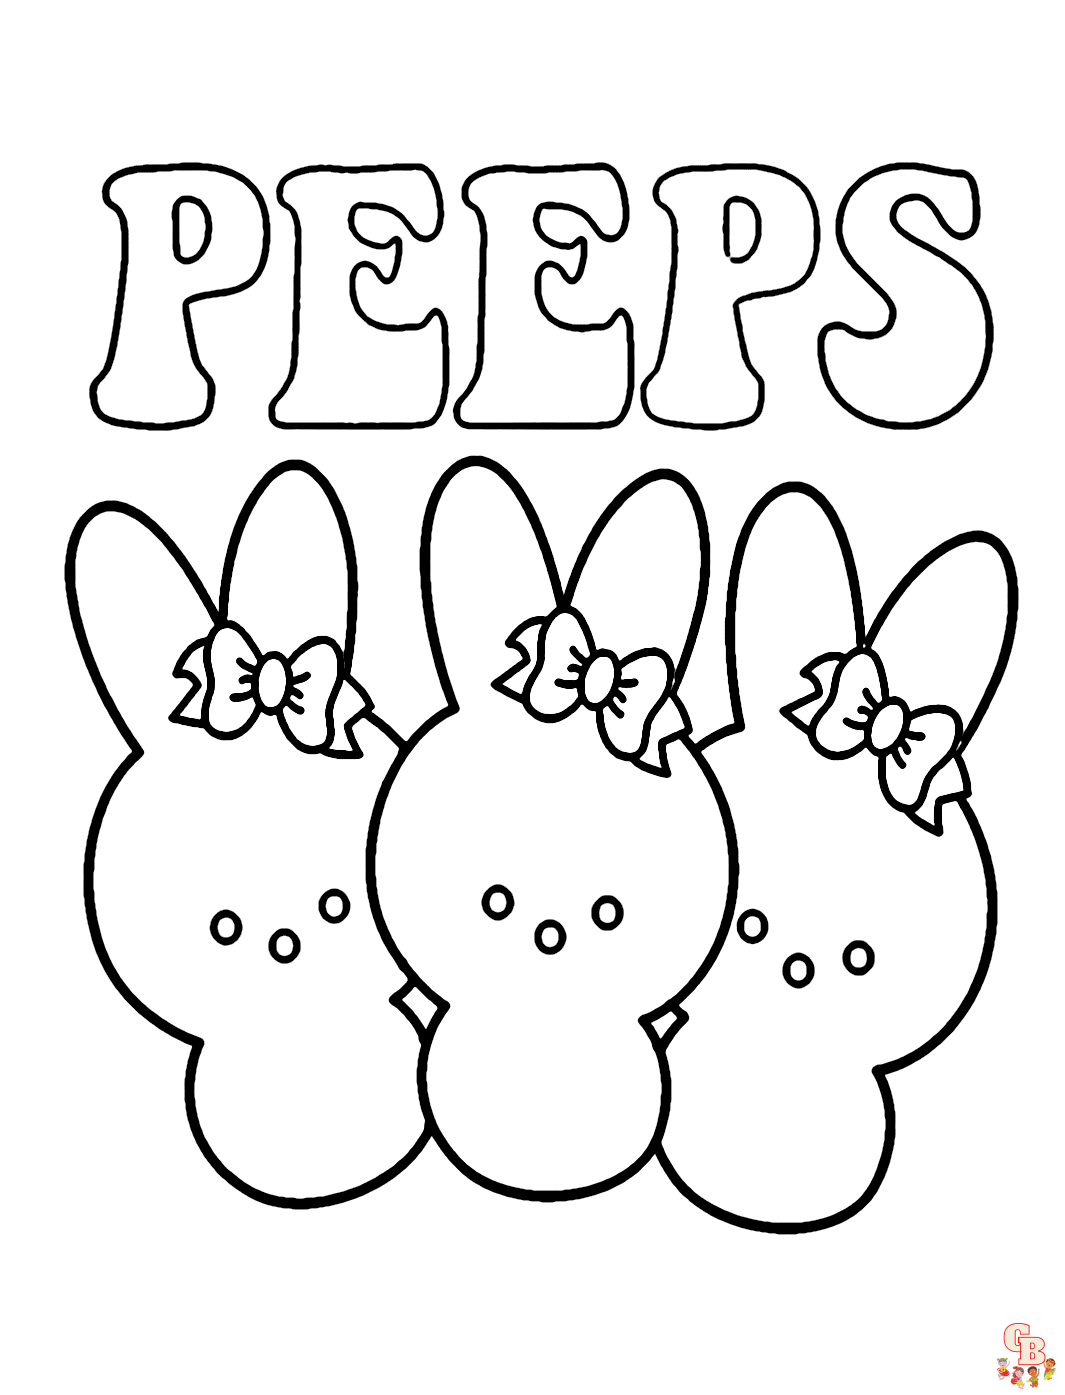 peeps coloring pages to print